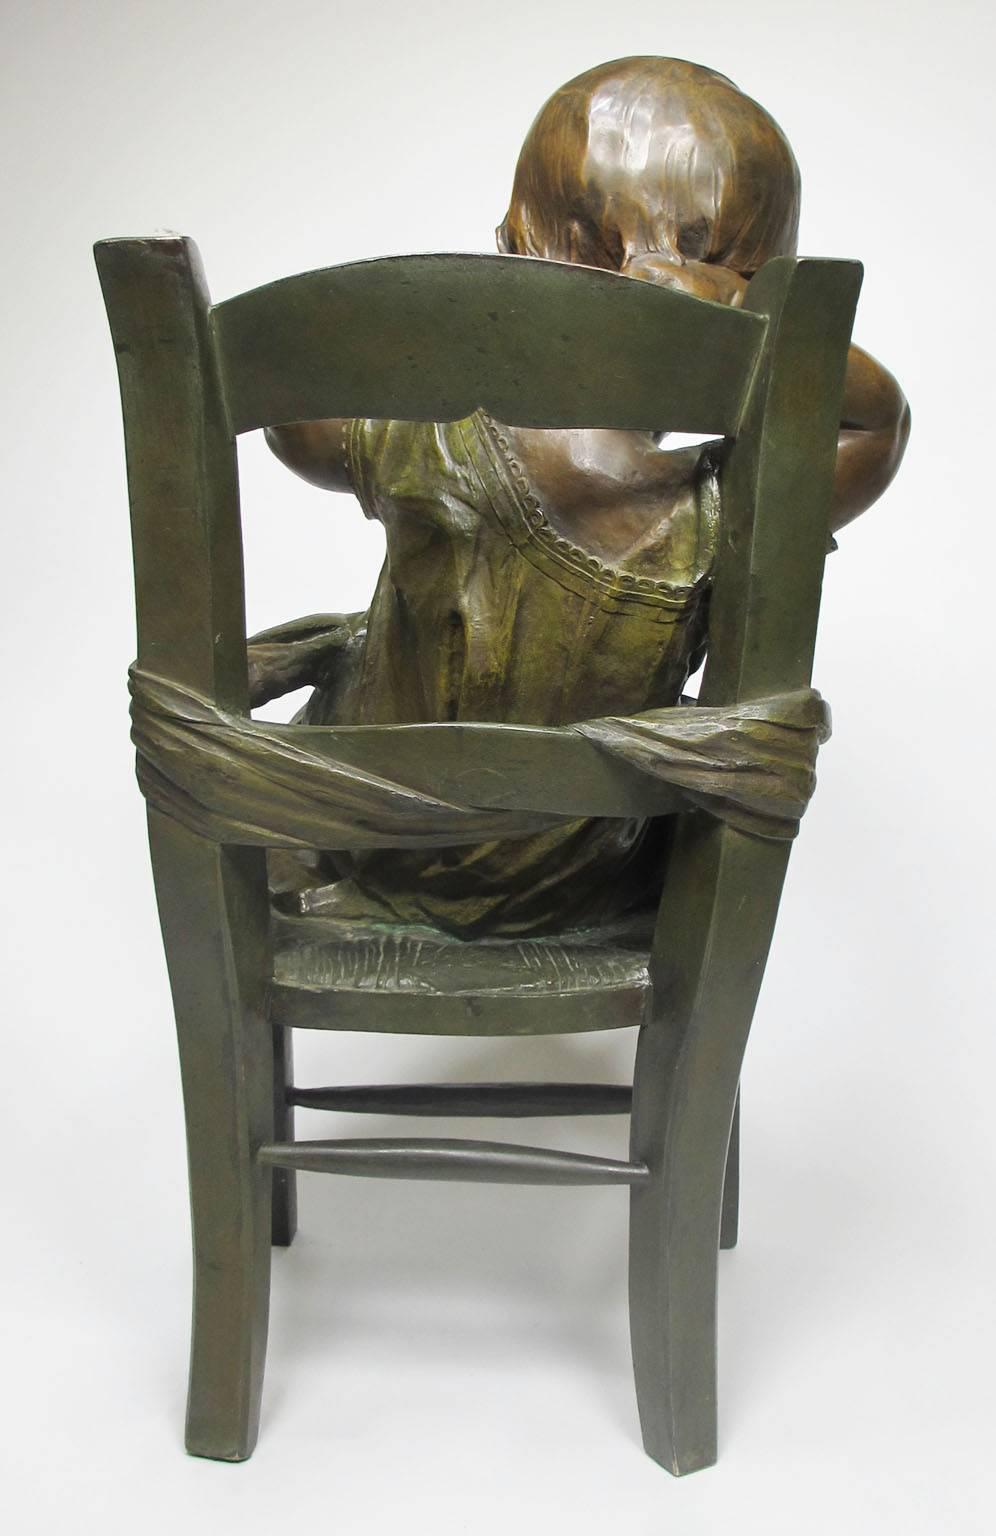 French 19th Century Patinated Bronze Sculpture an Infant Girl Seated in a Chair 1